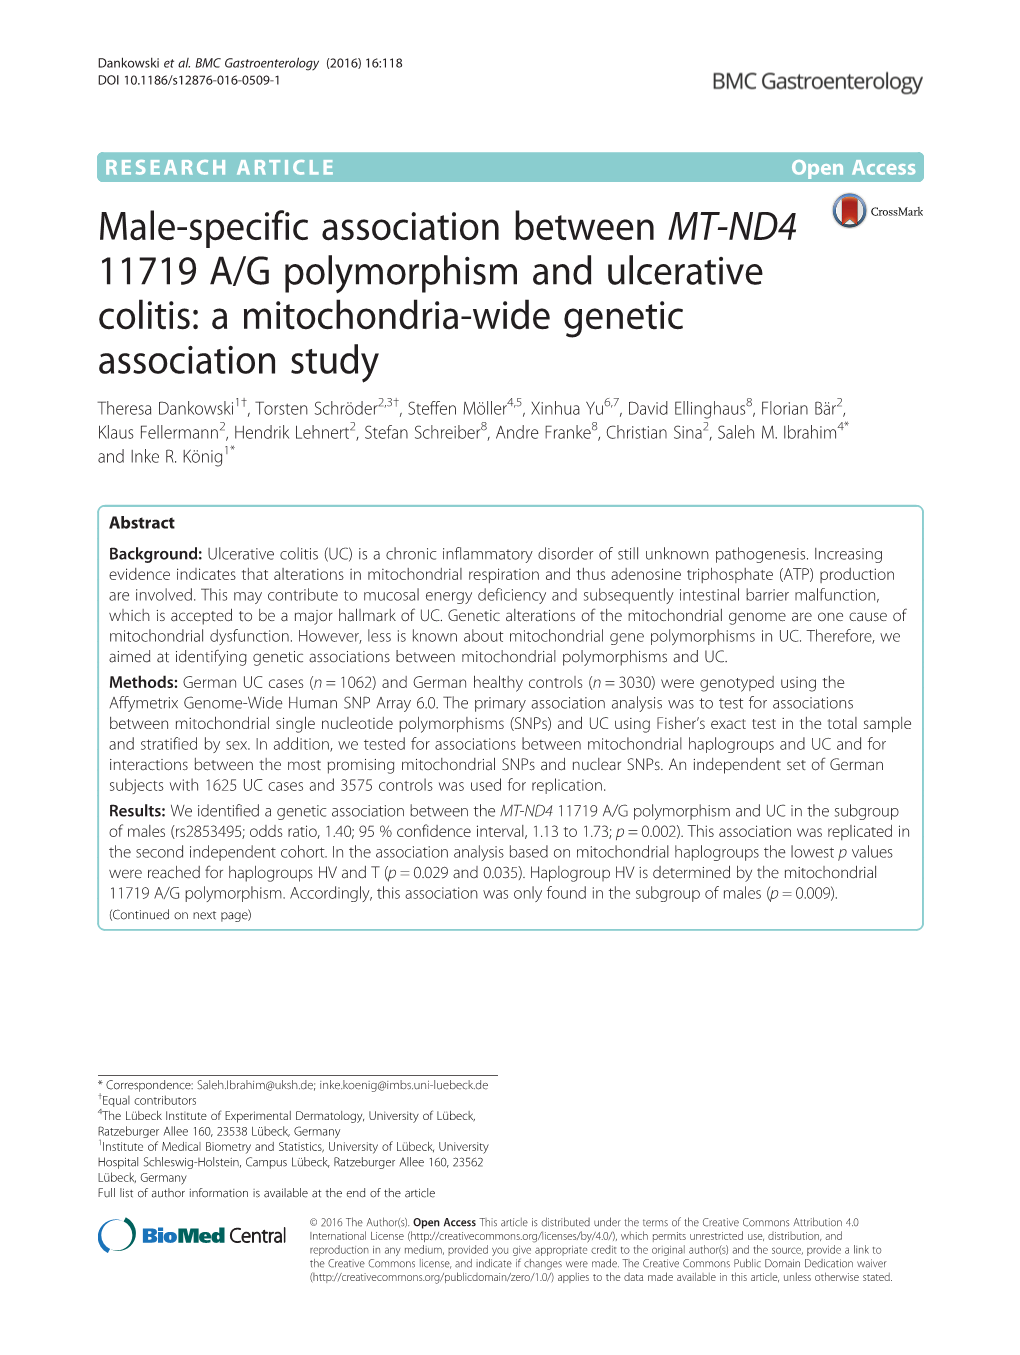 Male-Specific Association Between MT-ND4 11719 A/G Polymorphism And